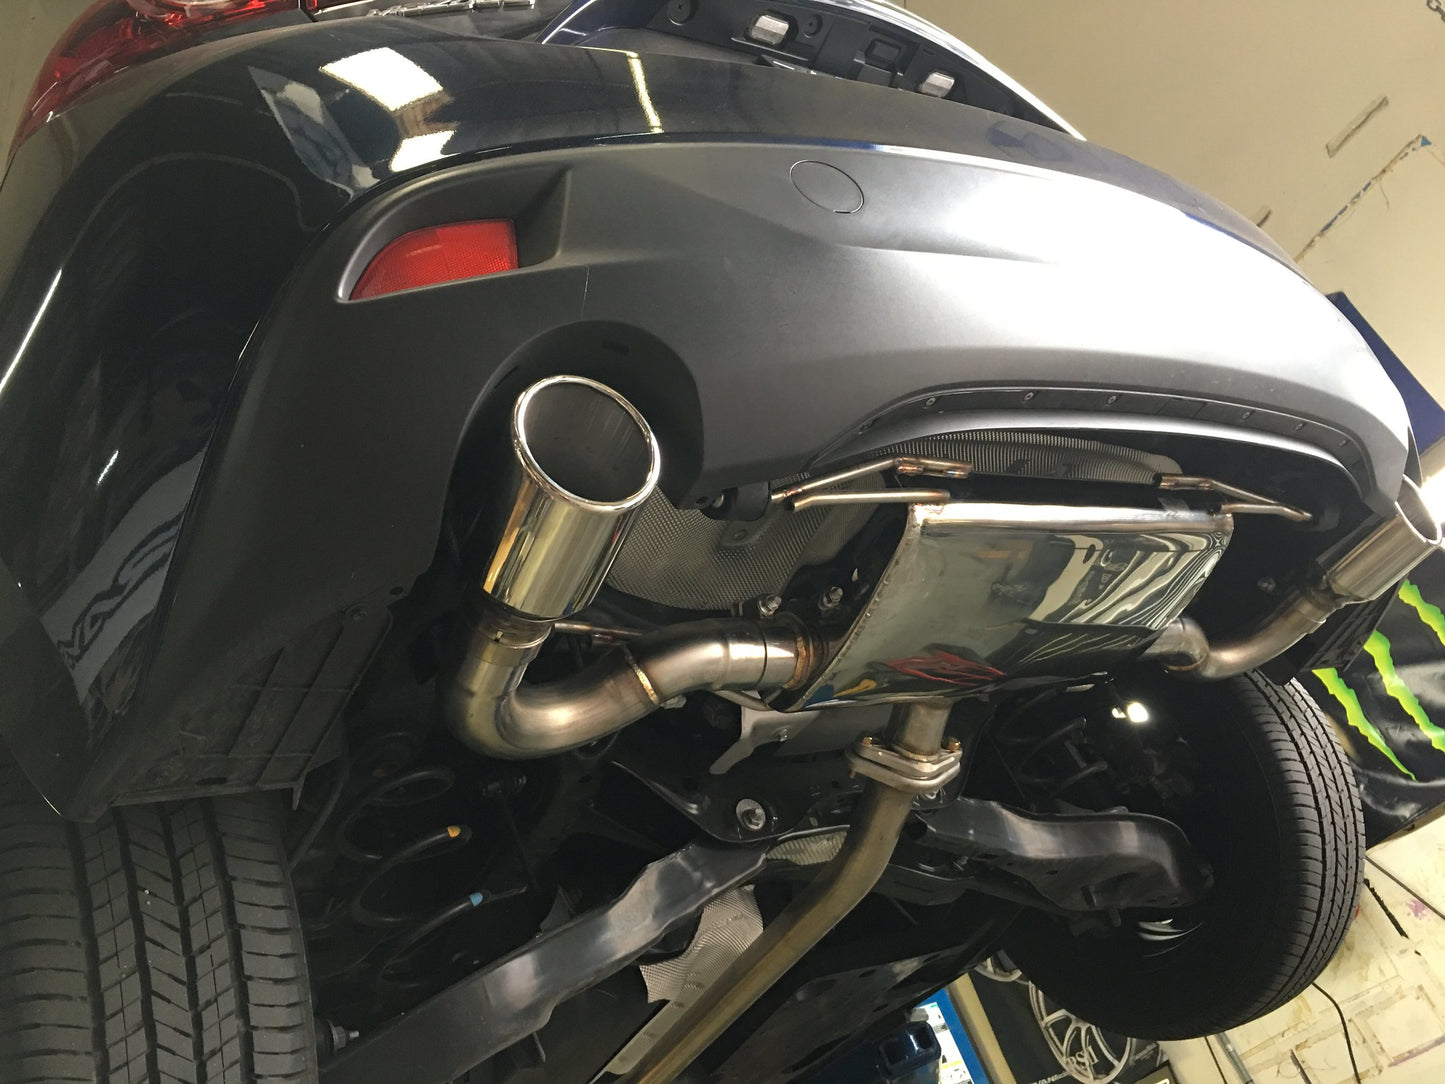 MXP 13-18 Mazda 3 SUS401 Rear Section SP Exhaust System